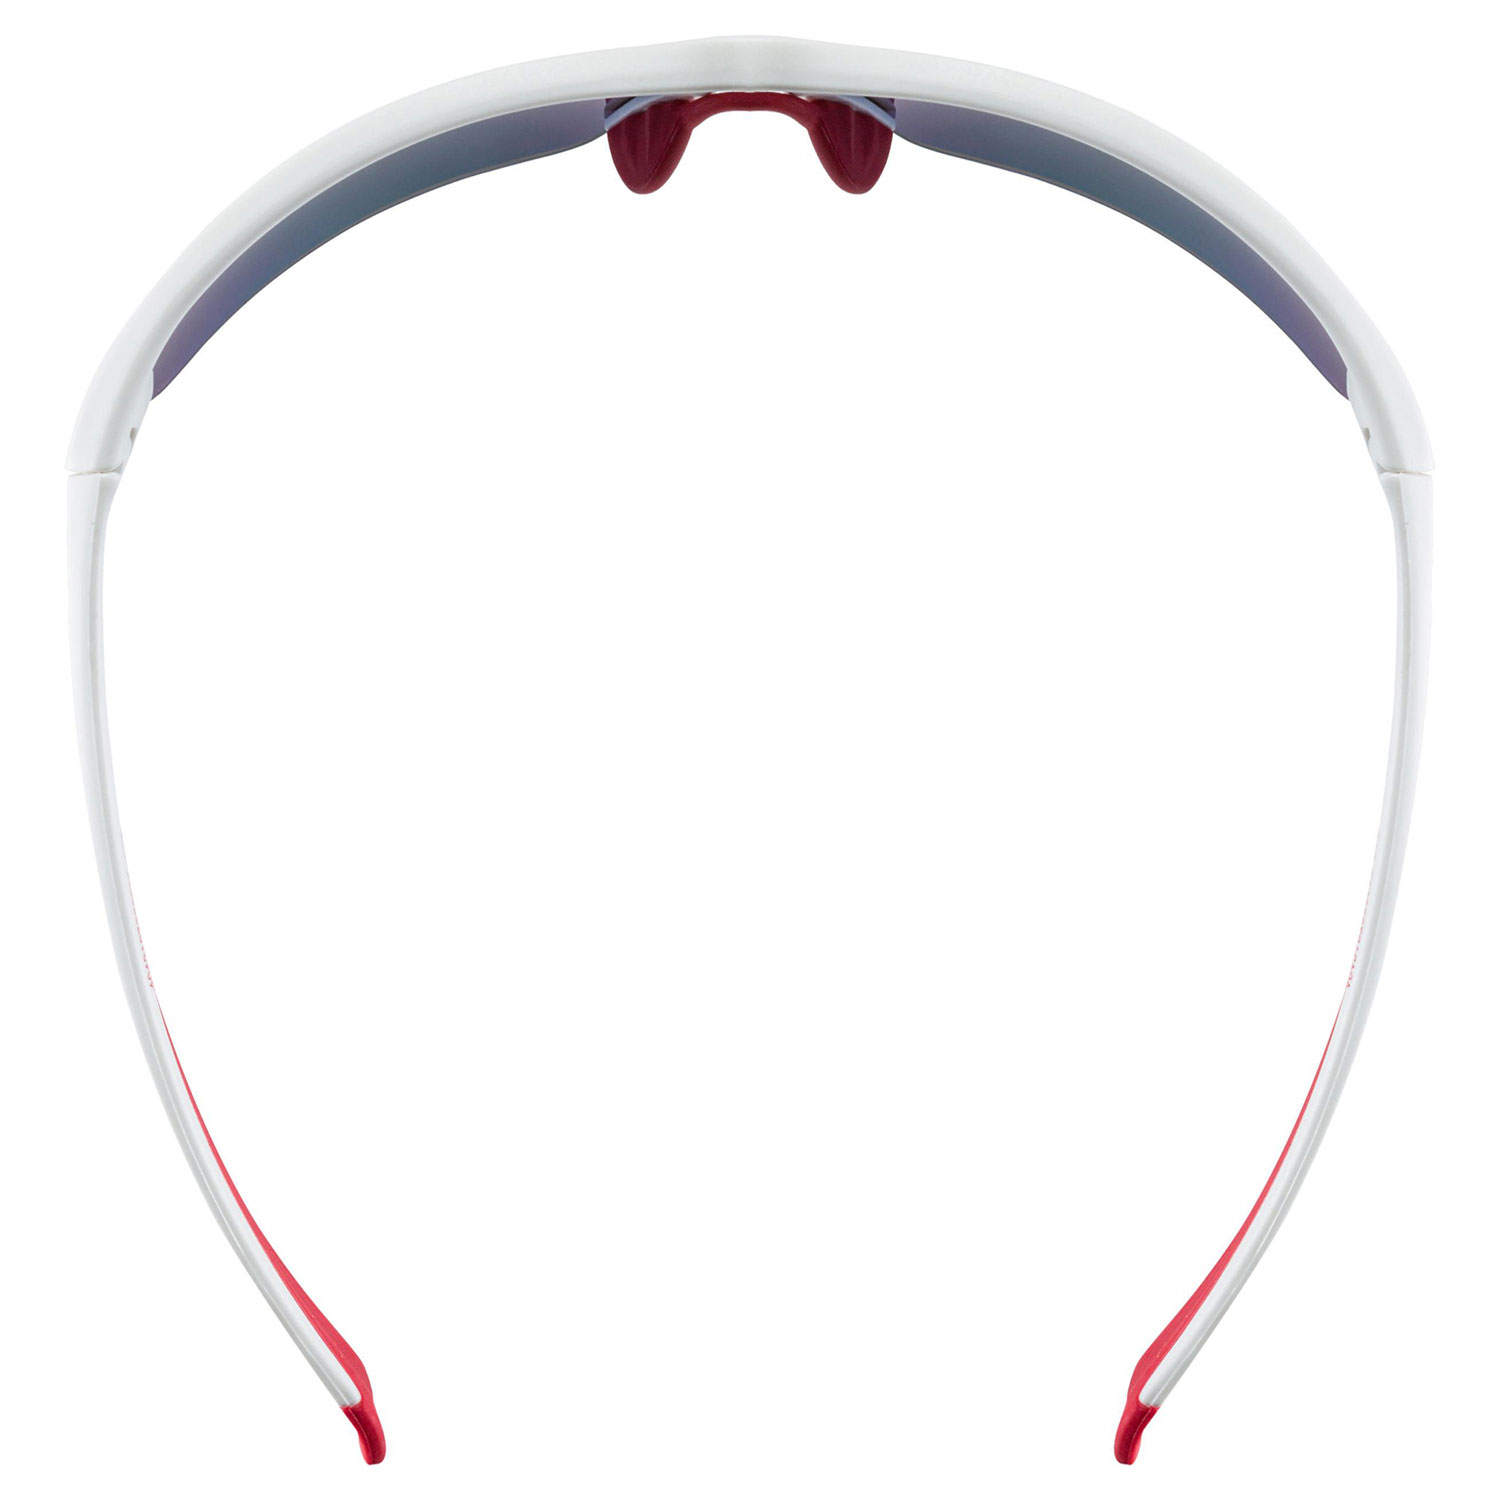 UVEX Sportstyle 215 White M.red/ Mir.red (s5306178316)